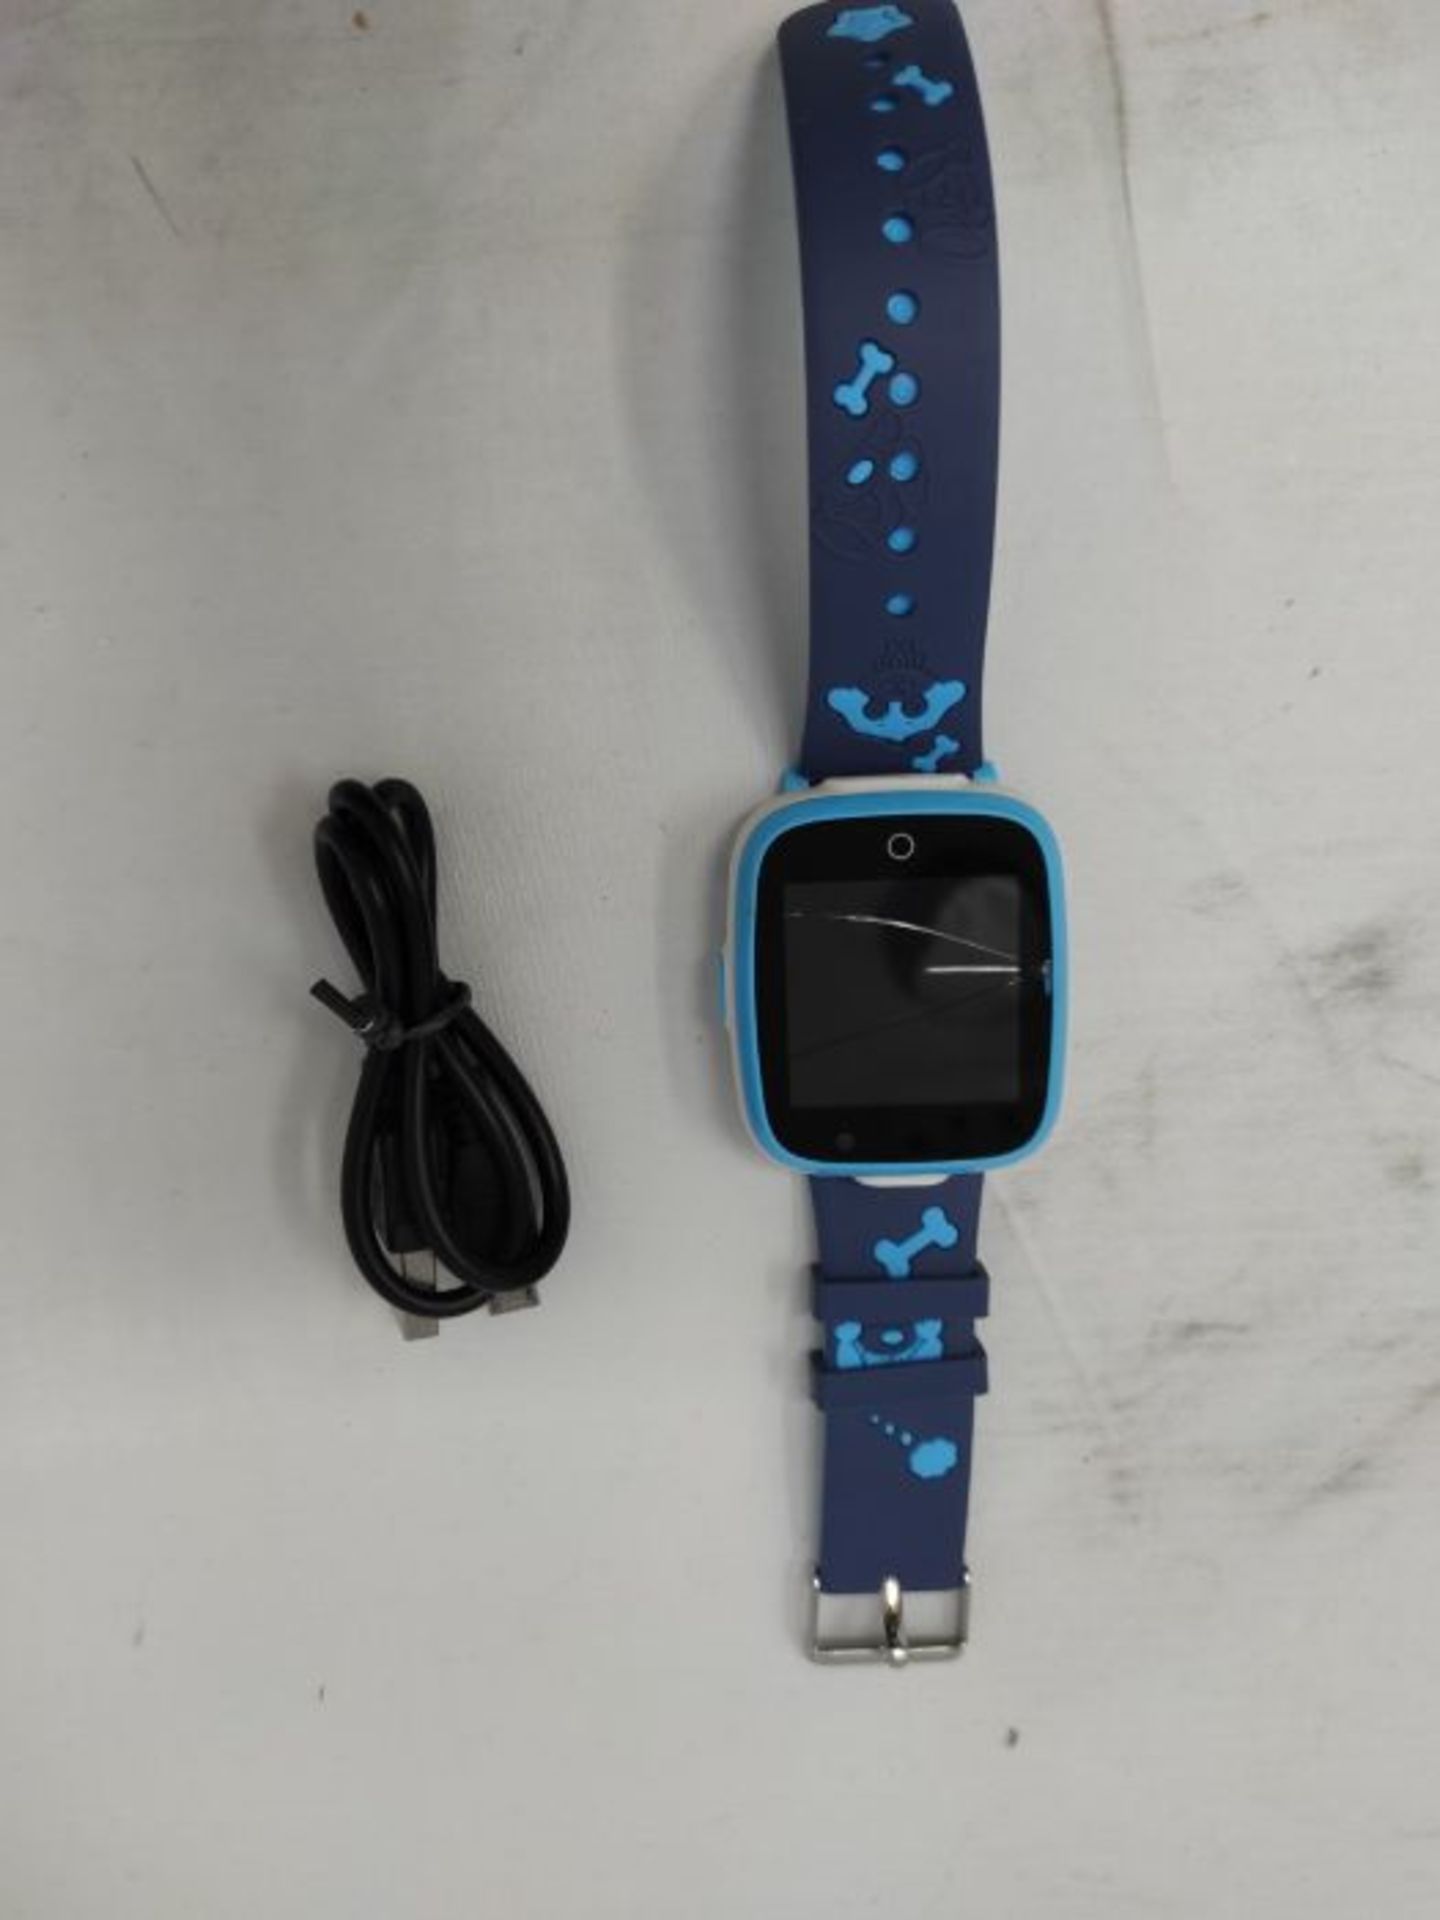 [CRACKED] Fitonme Kids Smart Watch?2 Cameras SOS Two Way Call HD Music Player 7 Puzzzl - Image 3 of 3